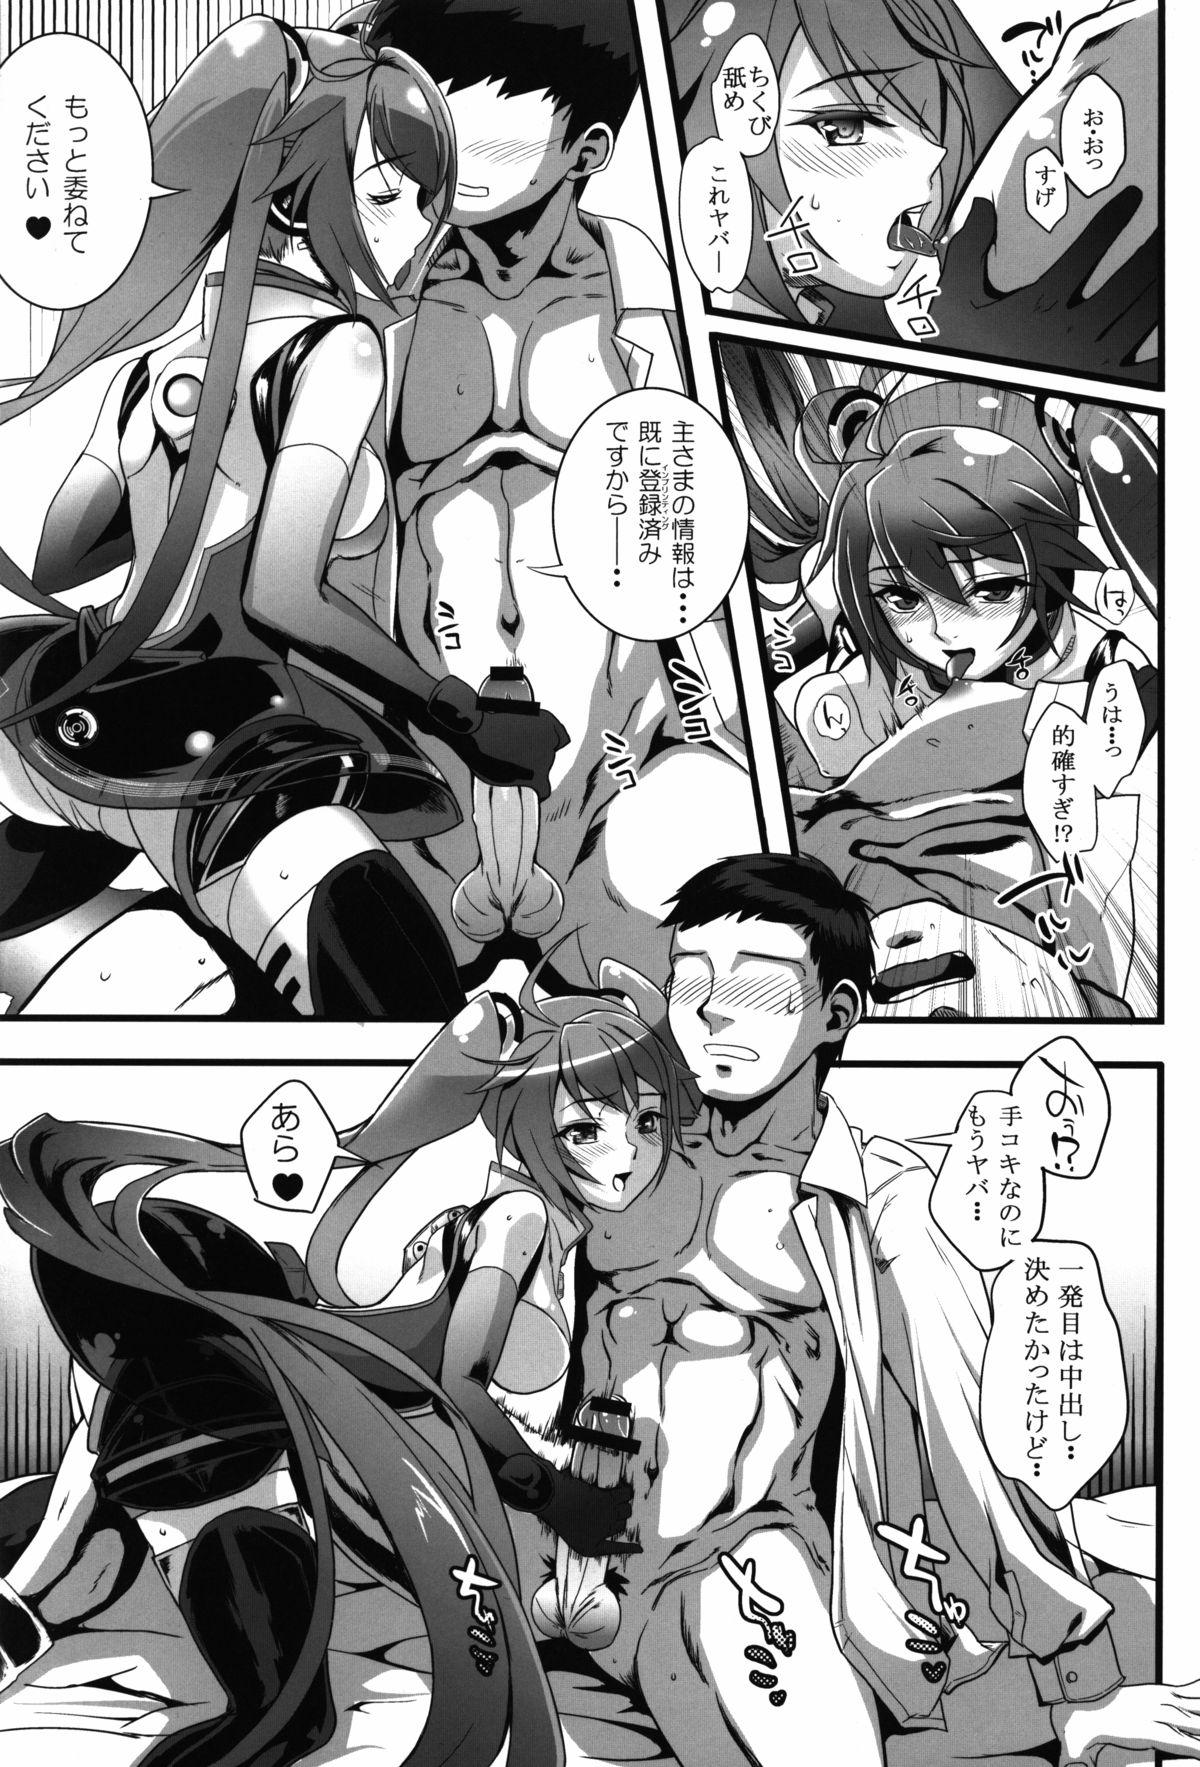 Man Racing Angeloid - Vocaloid Cum In Mouth - Page 8